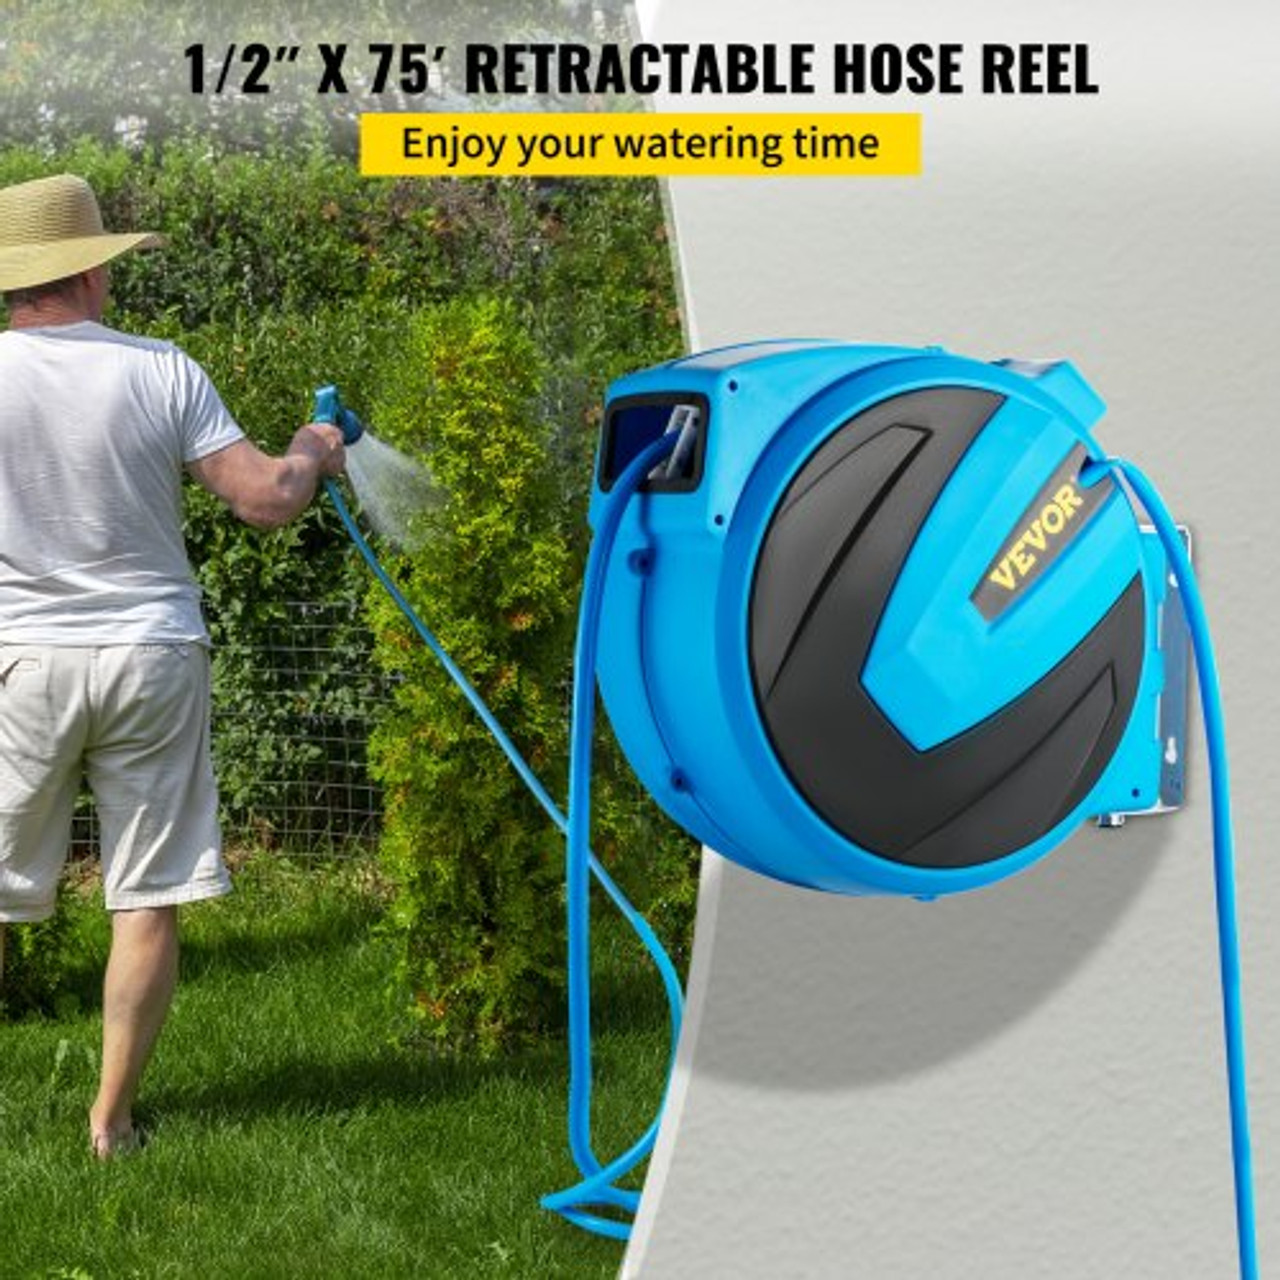 Retractable Hose Reel, 1/2 inch x 70 ft, Any Length Lock & Automatic Rewind Water  Hose, Wall Mounted Garden Hose Reel w/ 180ø Swivel Bracket and 7 Pattern  Hose Nozzle, Blue